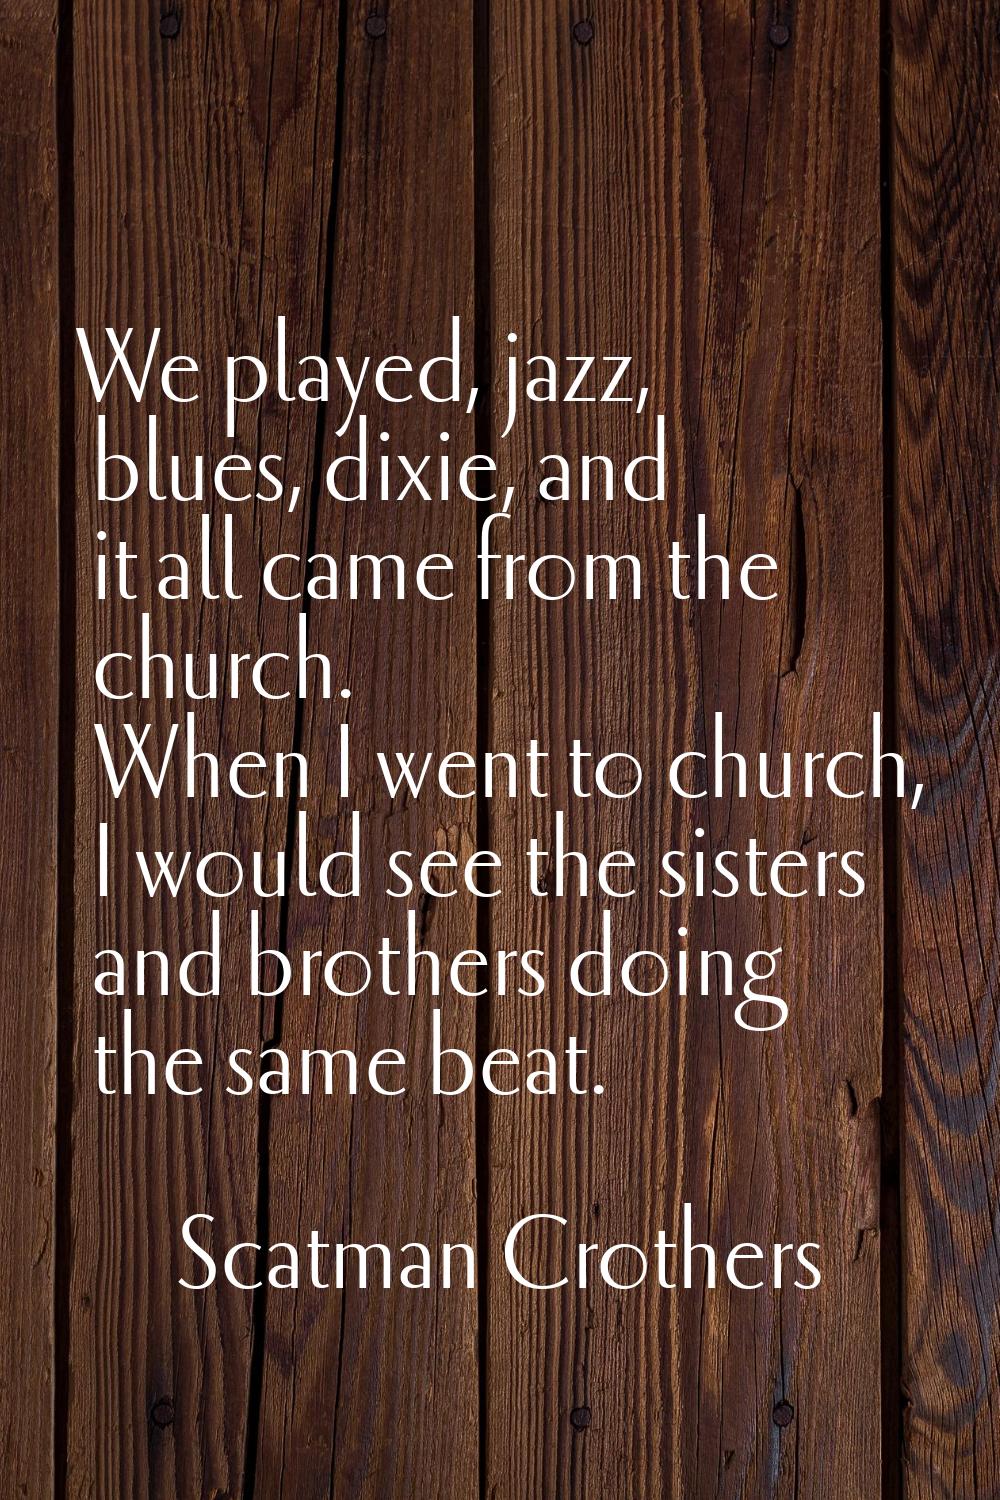 We played, jazz, blues, dixie, and it all came from the church. When I went to church, I would see 